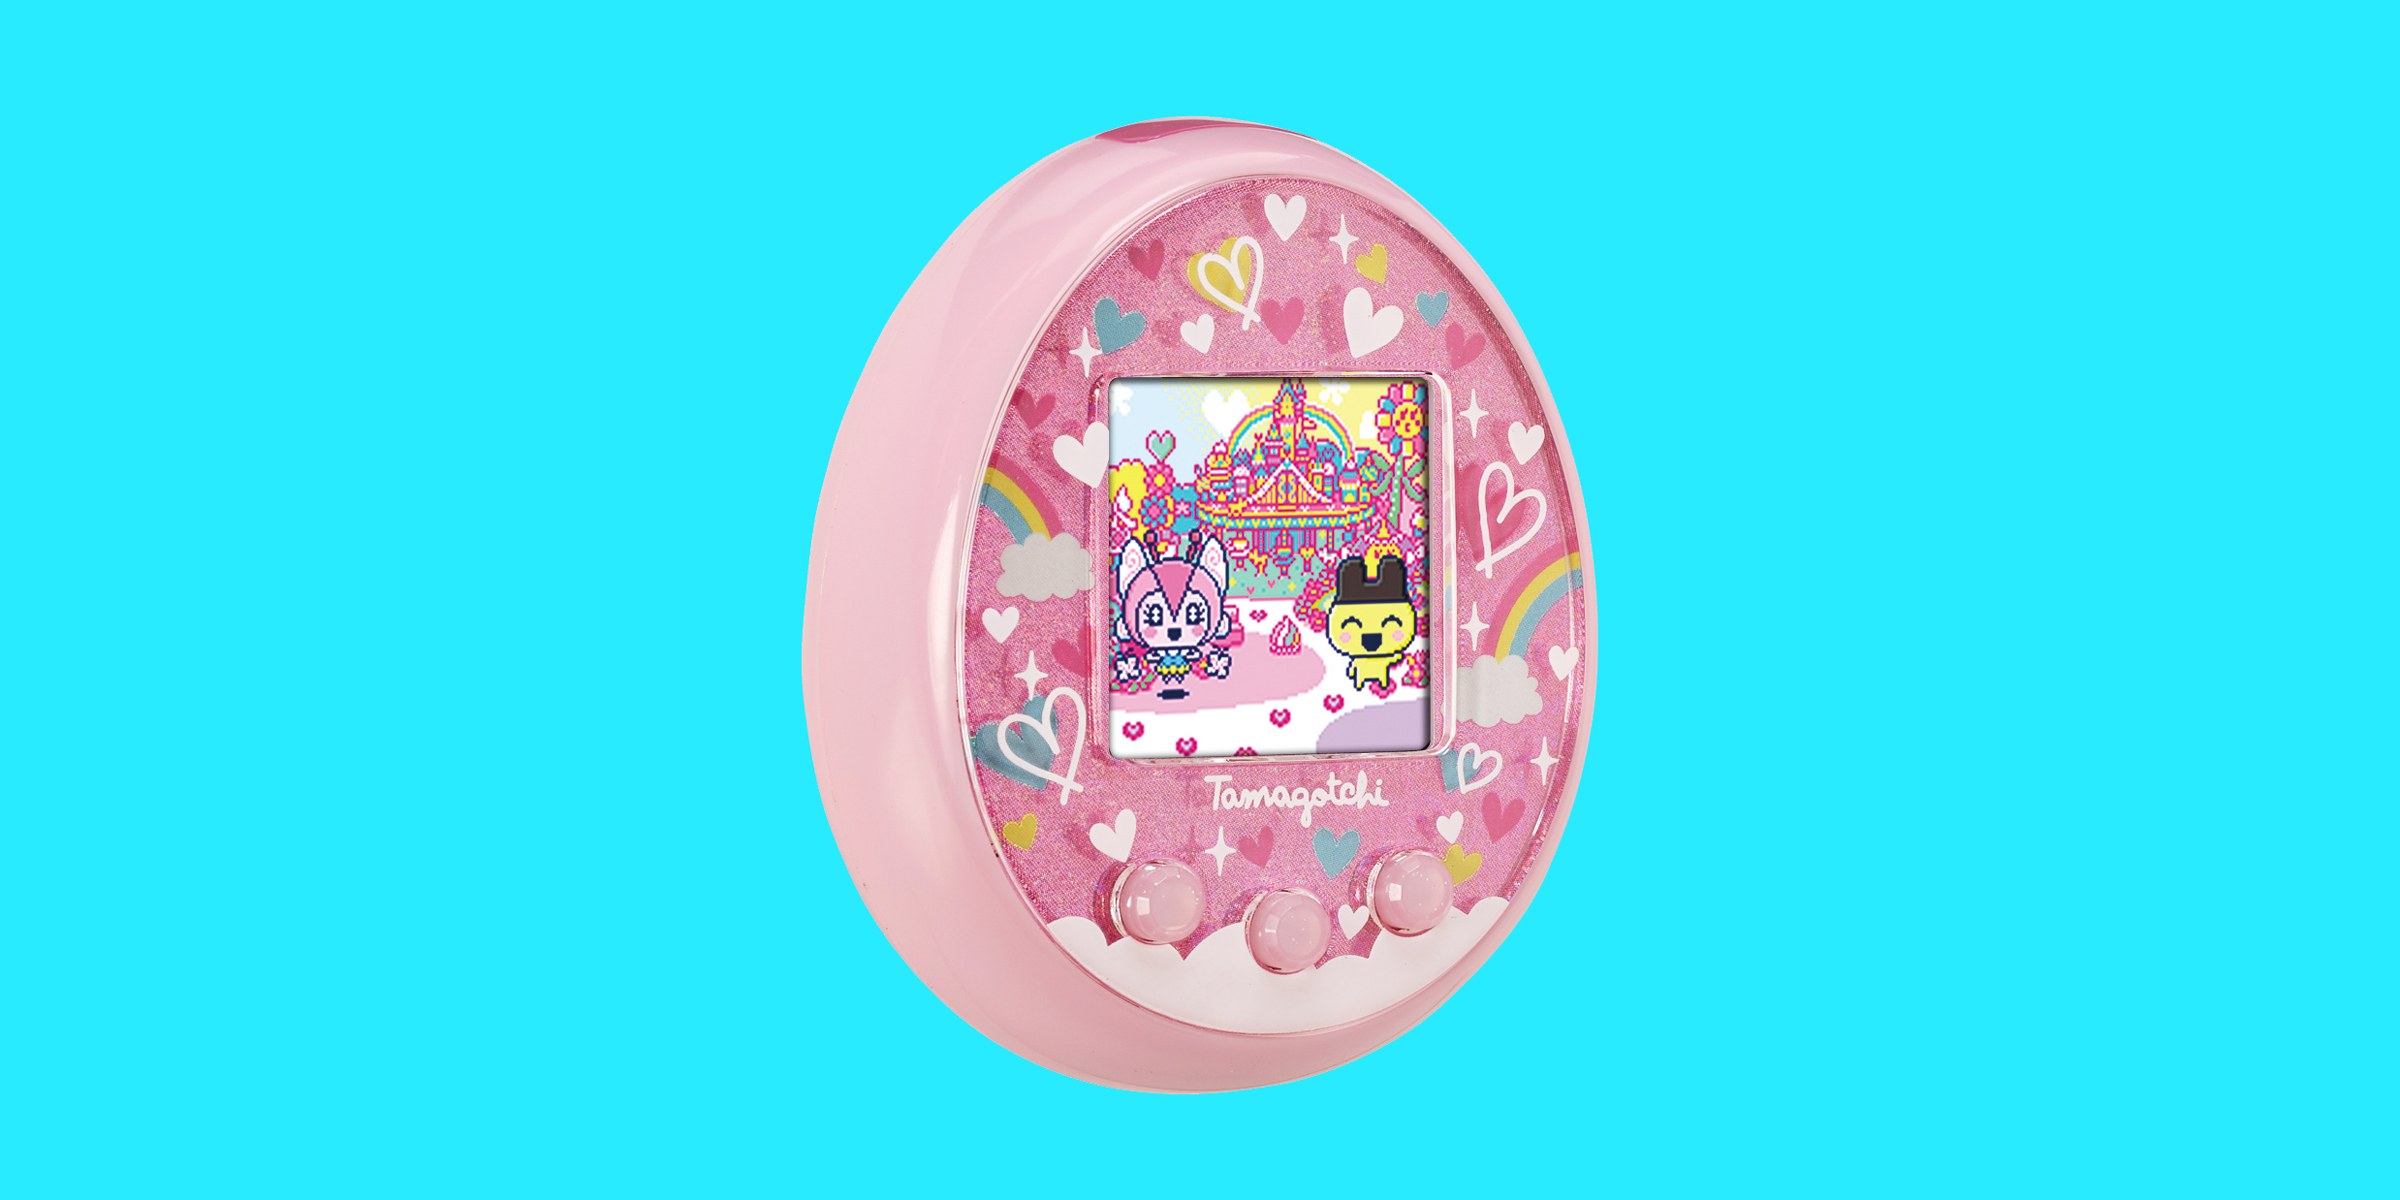 New generation of toys - Tamagotchi On will be released soon. you can pre-order it! - YouLoveIt.com